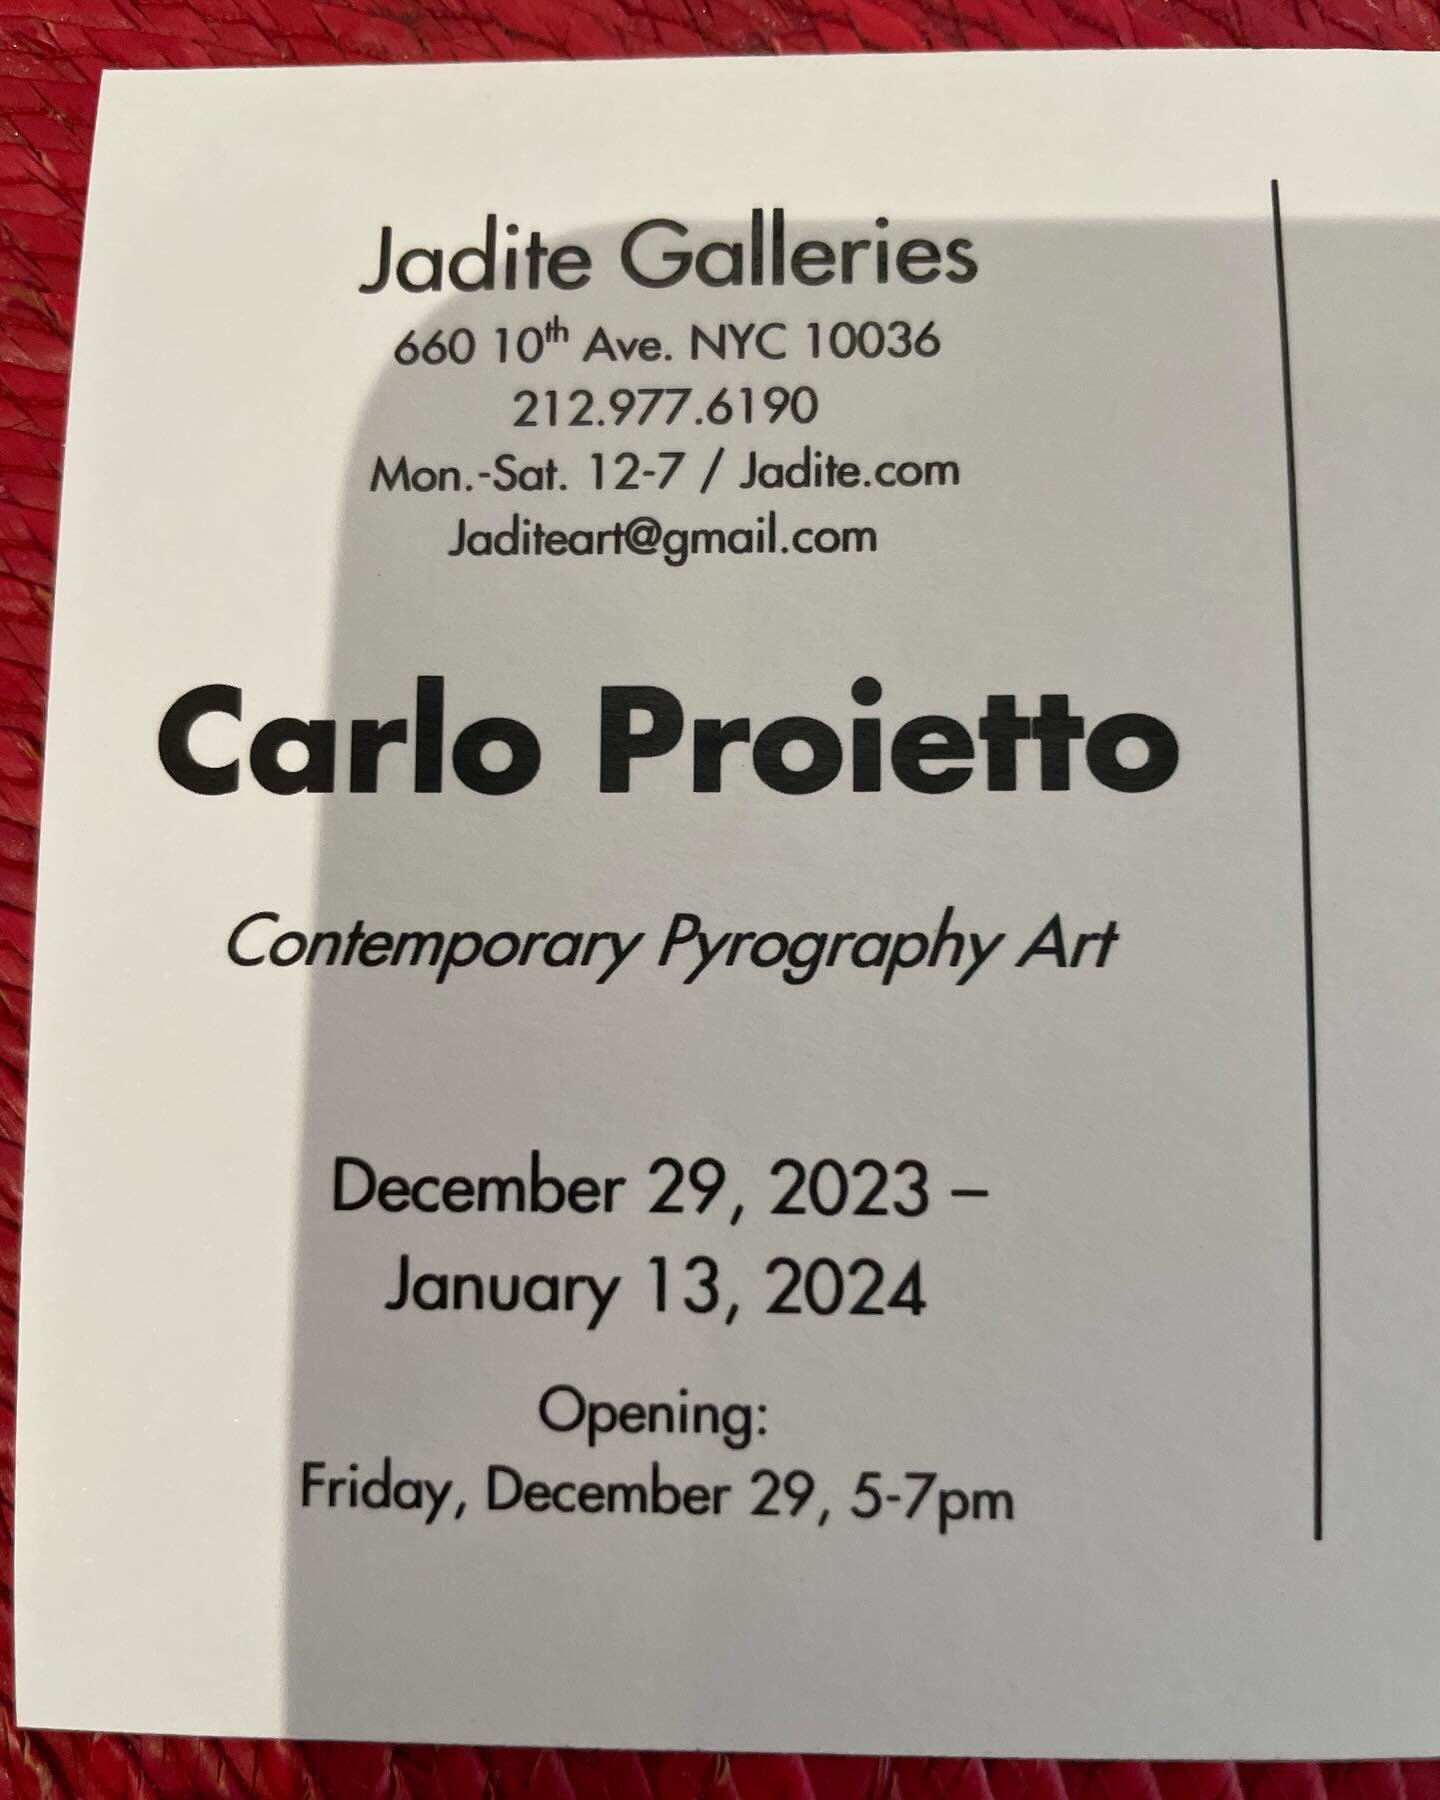 Carlo Proietto solo exhibition at Jadite Galleries, Manhattan,NYC - Contemporary Pyrography Art. The show runs till February 10, 2024